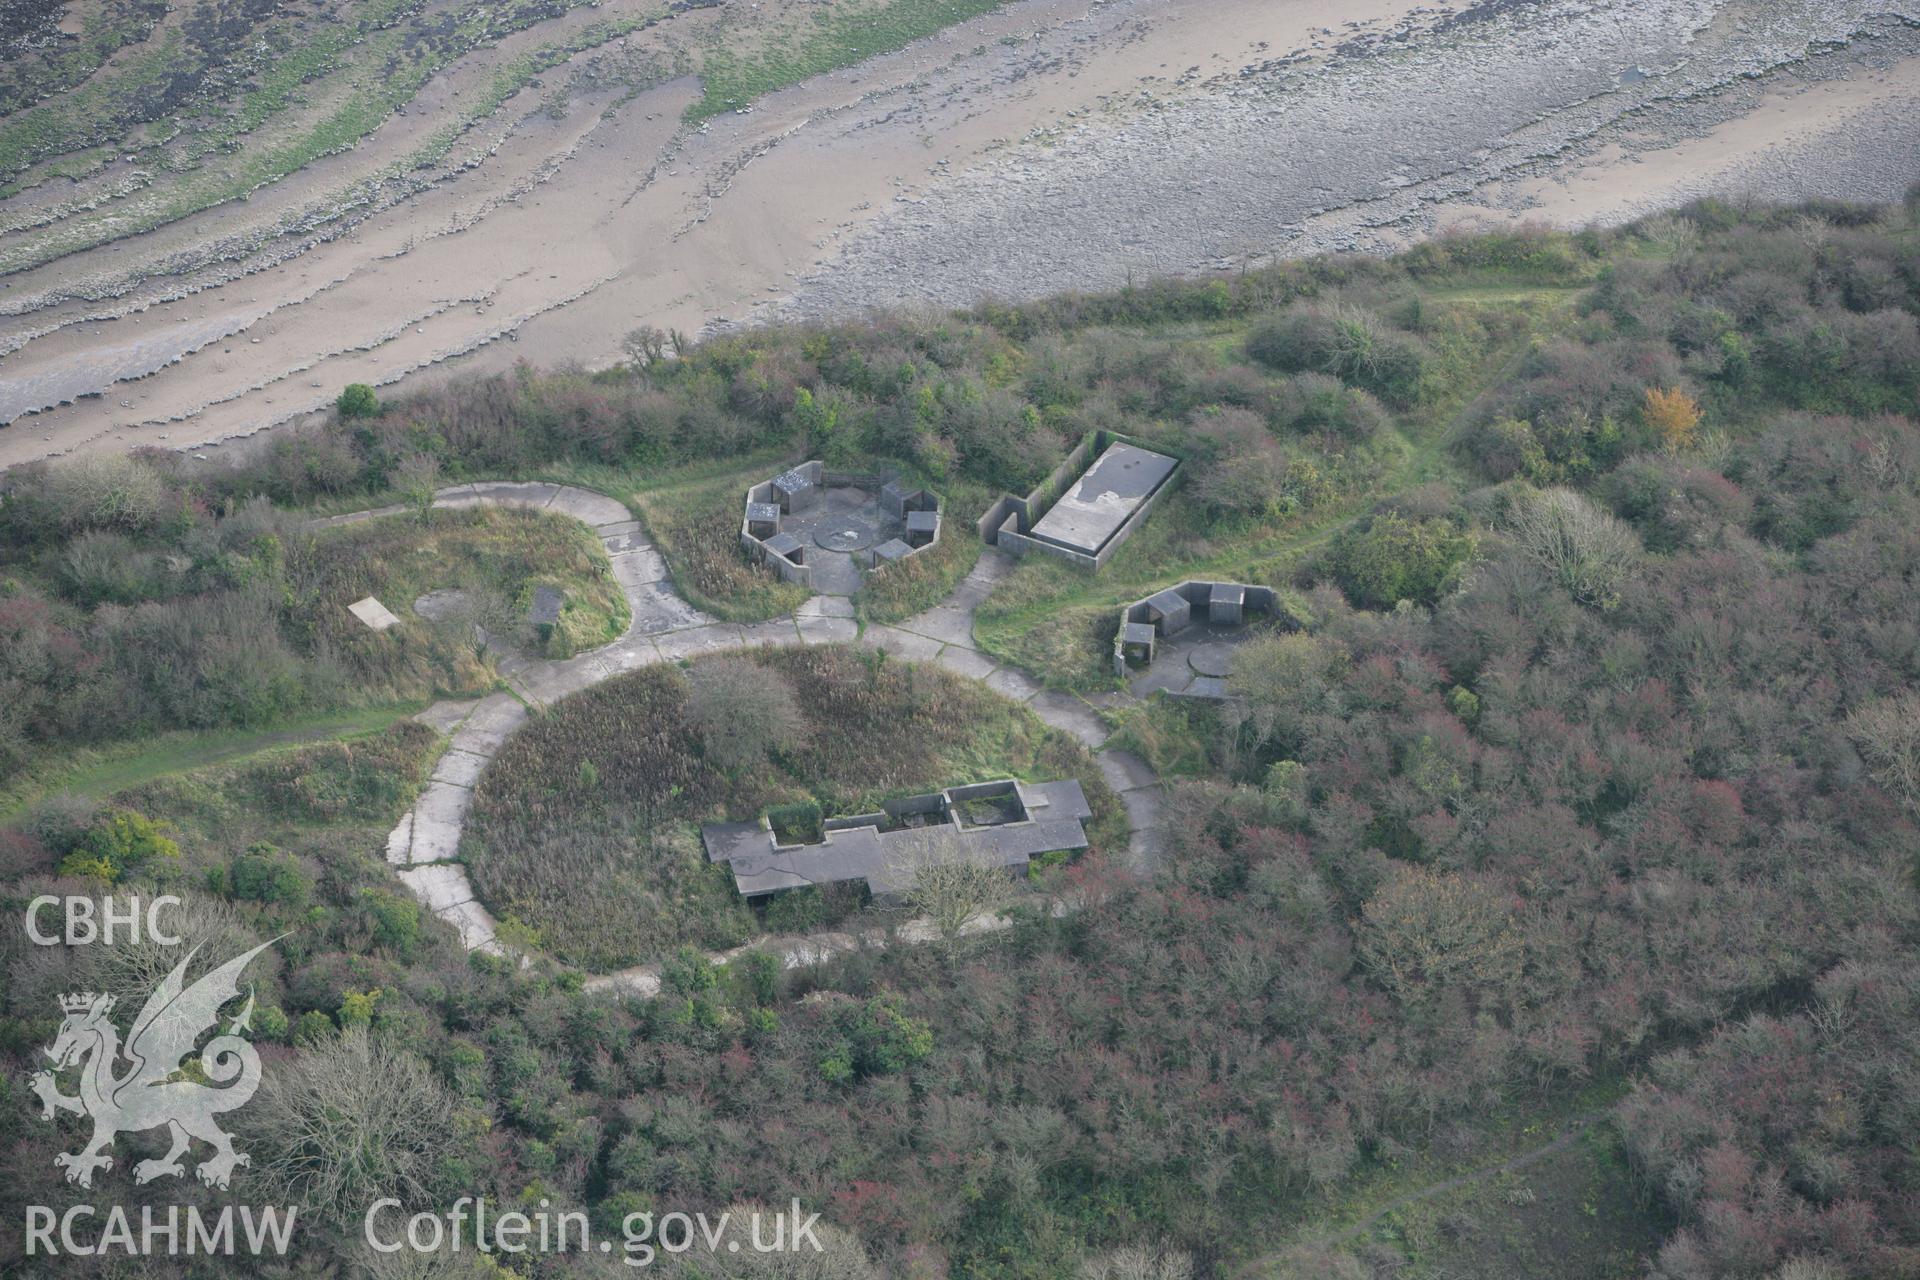 RCAHMW colour oblique photograph of Lavernock Point Fortified Battery. Taken by Toby Driver on 12/11/2008.